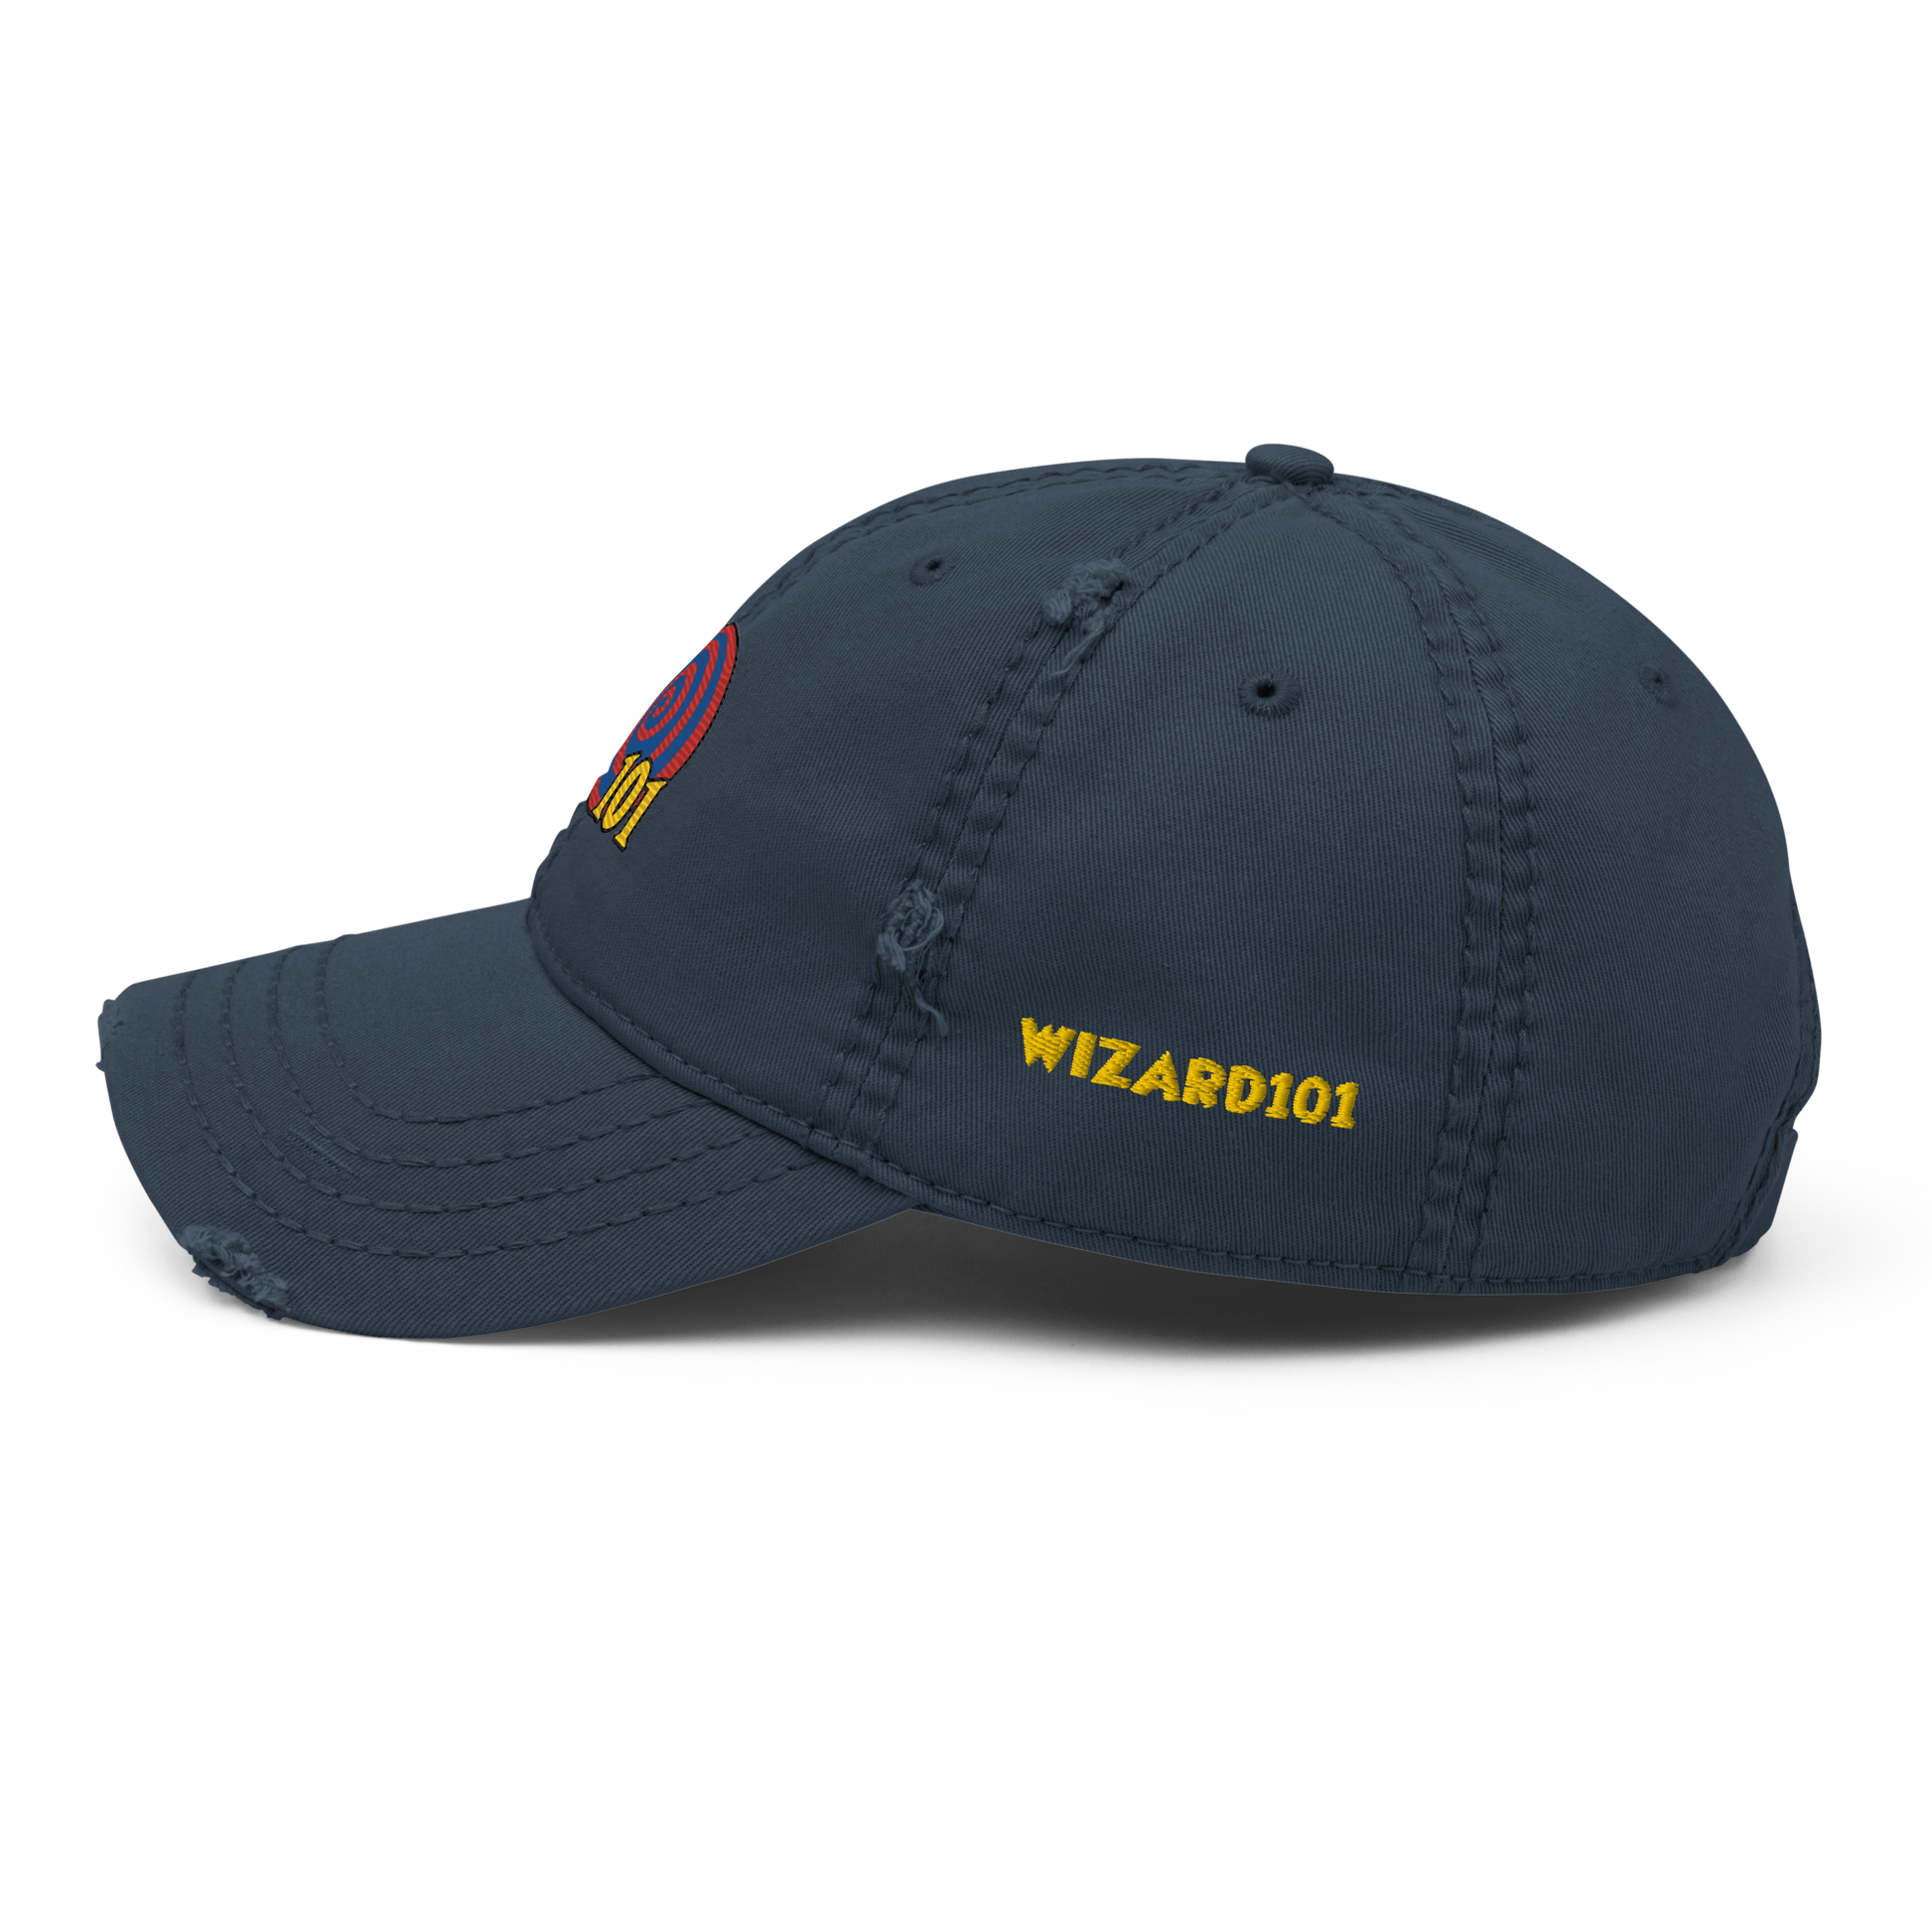 Wizard101-Spiral-Distressed-Dad-Hat2-embroiderred-navy-leftside